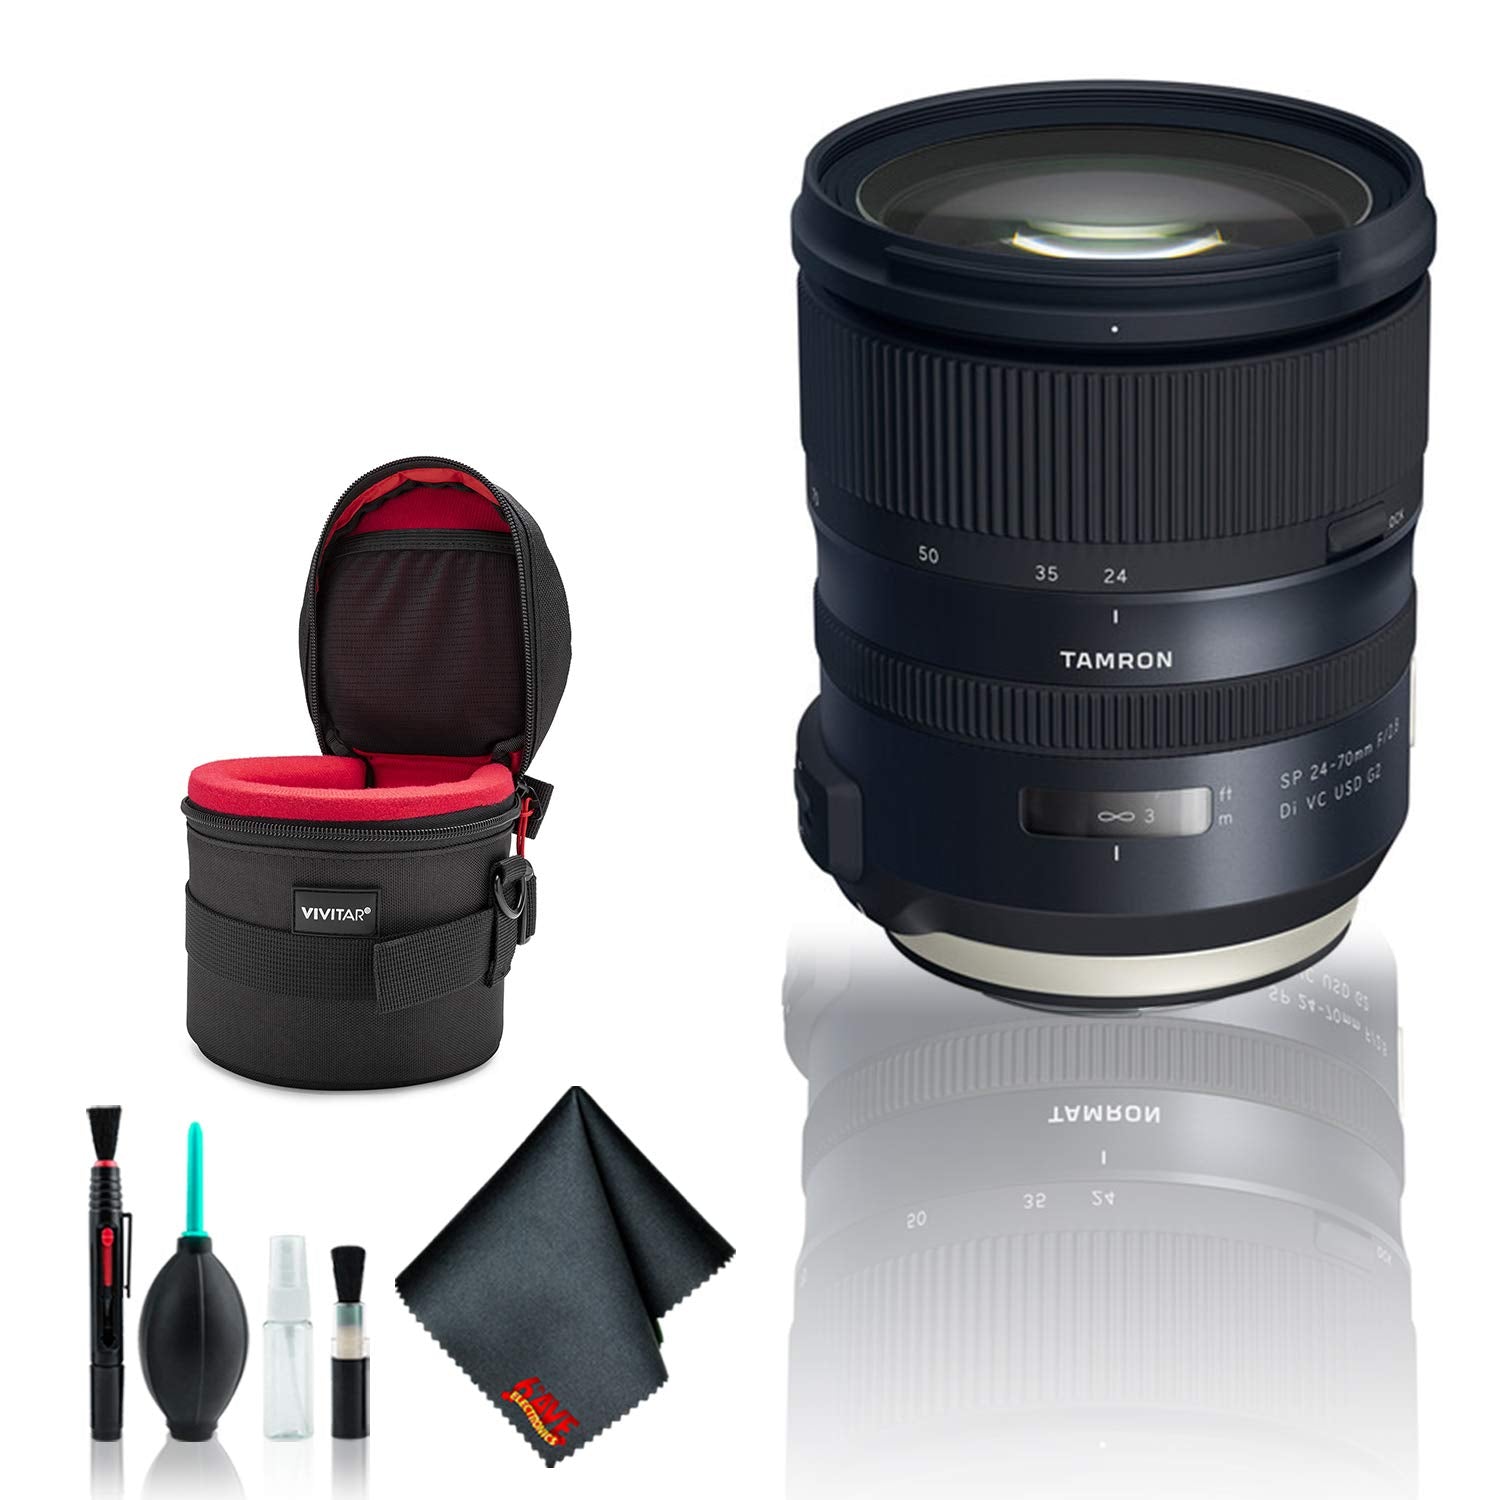 Tamron SP 24-70mm f/2.8 Di VC USD G2 Lens for Canon EF Ultimate Bundle